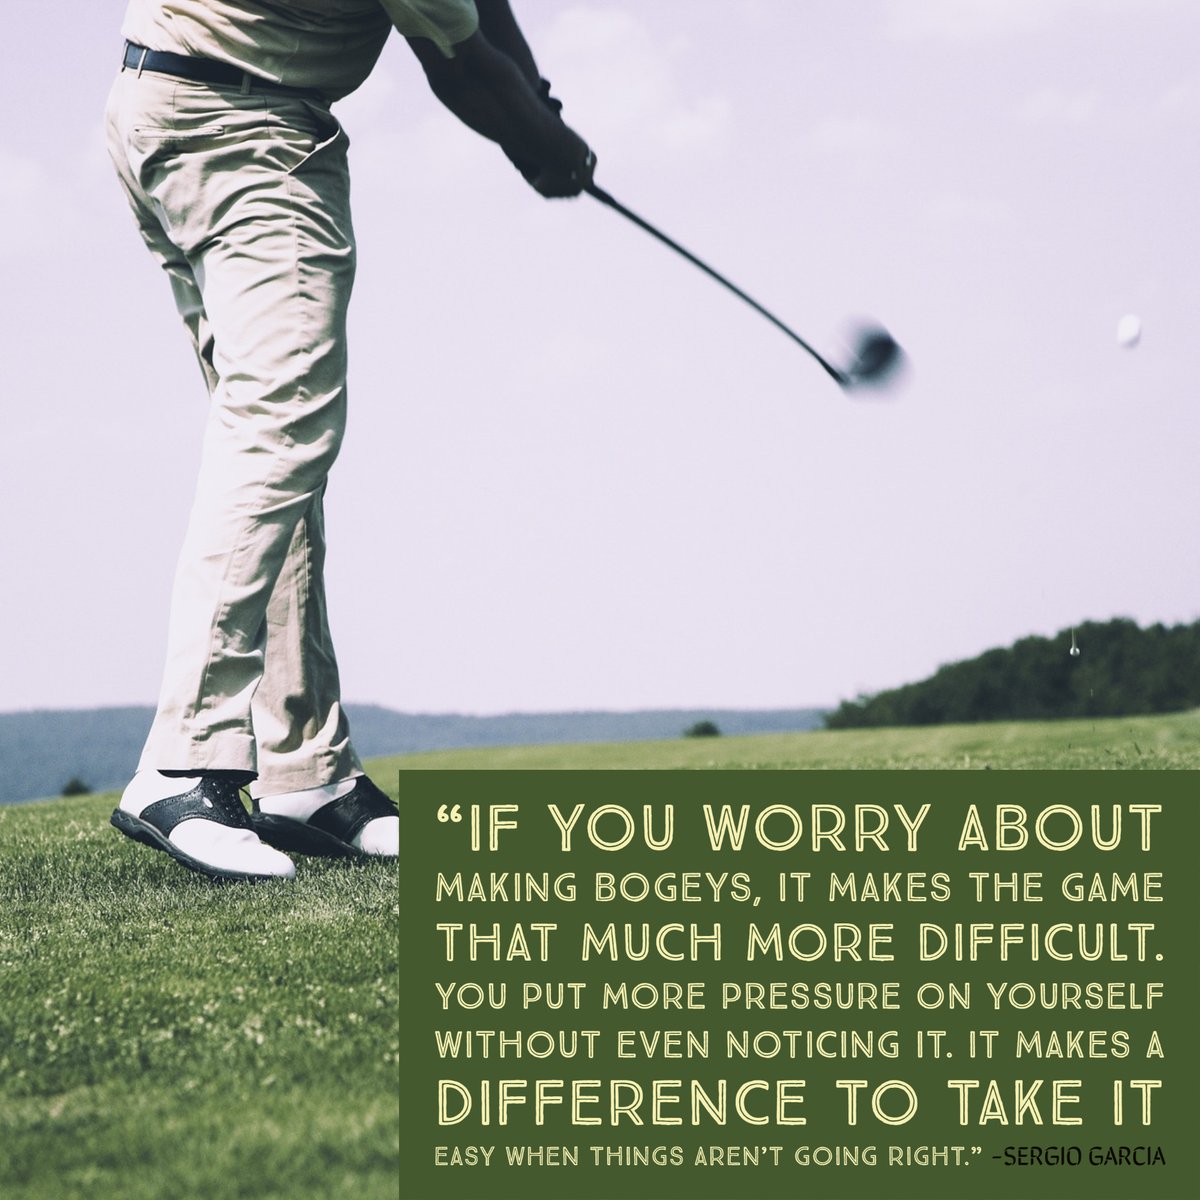 “If you worry about making bogeys, it makes the game that much more difficult. You put more pressure on yourself without even noticing it. It makes a difference to take it easy when things aren’t going right.” -Sergio Garcia

#motivationalquote #golf #golfquotes https://t.co/sJxWSYIfFF